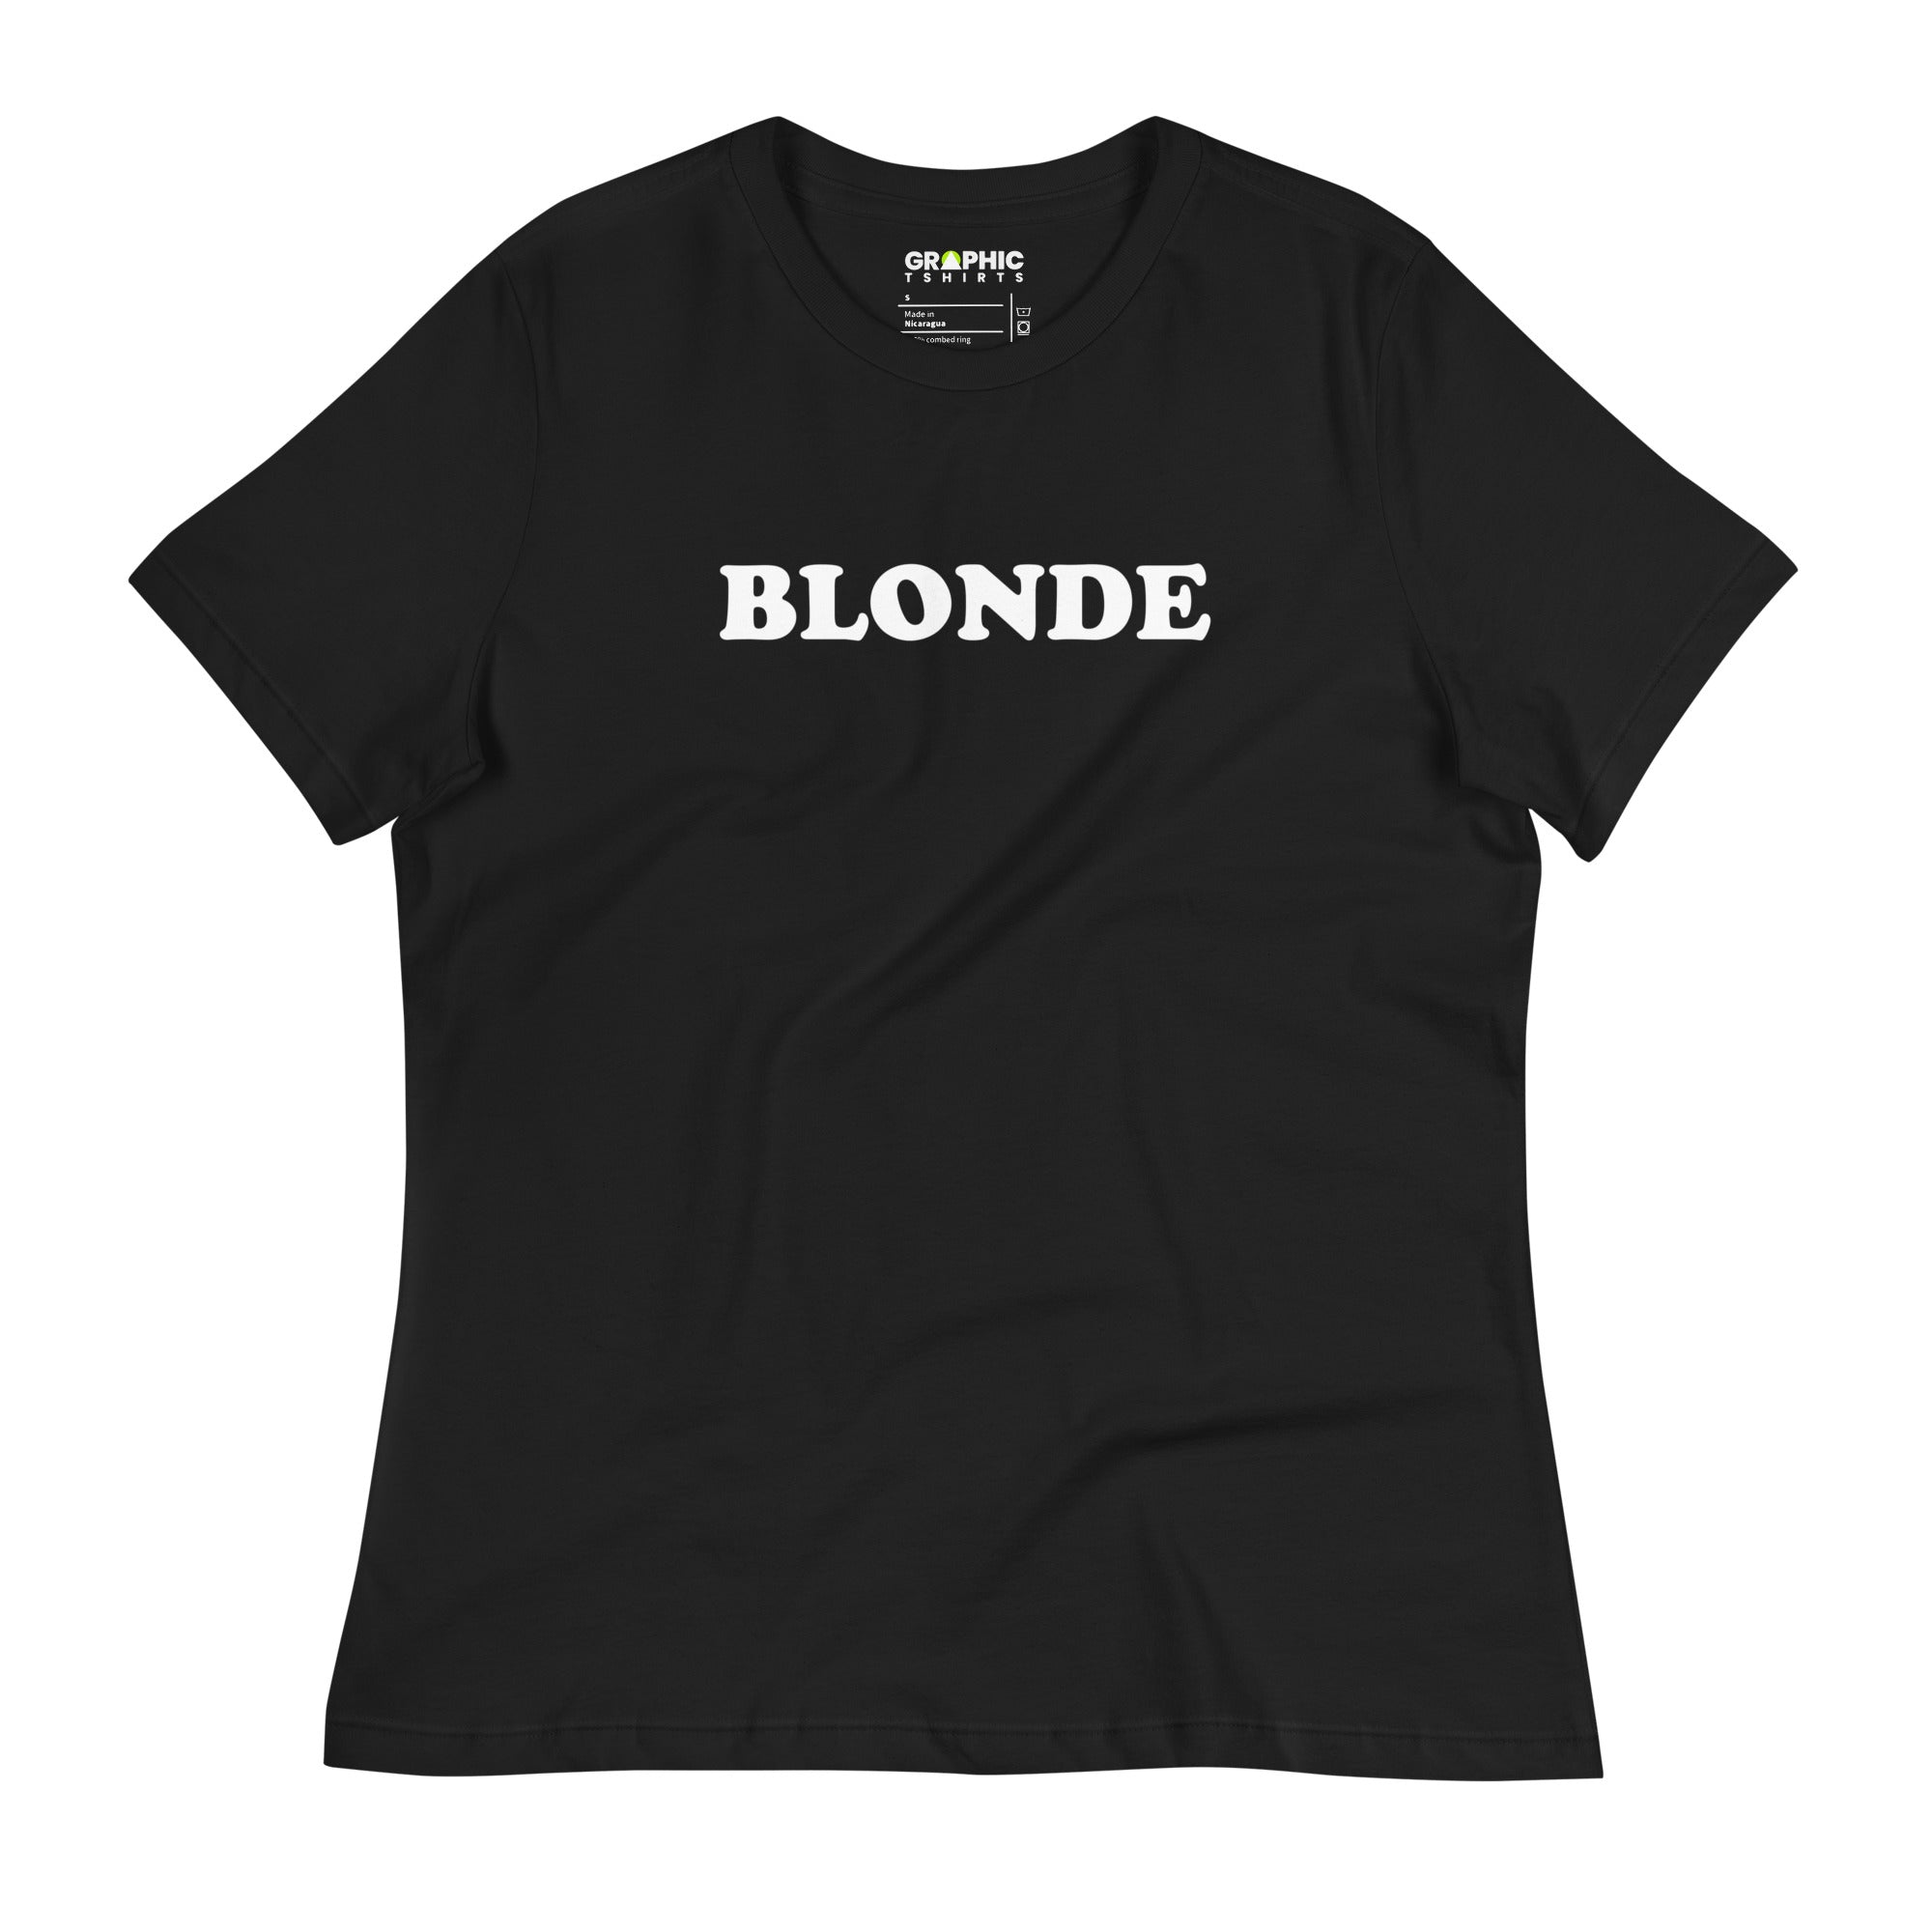 Women's Relaxed T-Shirt - Blonde - GRAPHIC T-SHIRTS